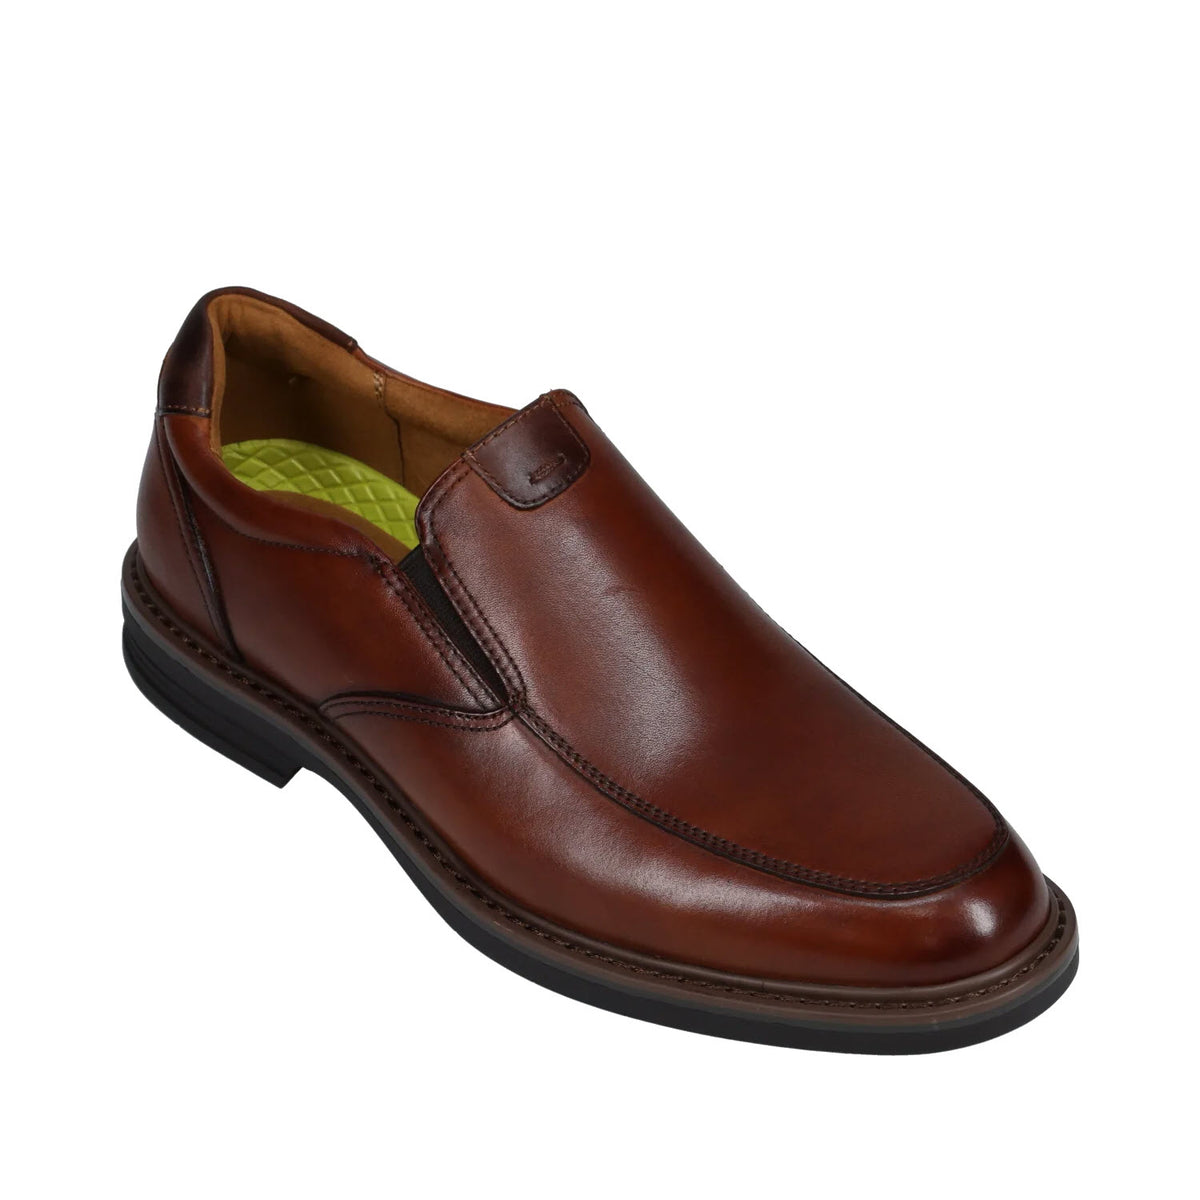 A brown leather Florsheim Norwalk Moc Toe Slip On Cognac men&#39;s shoe with a green interior lining and black sole, displayed against a white background.